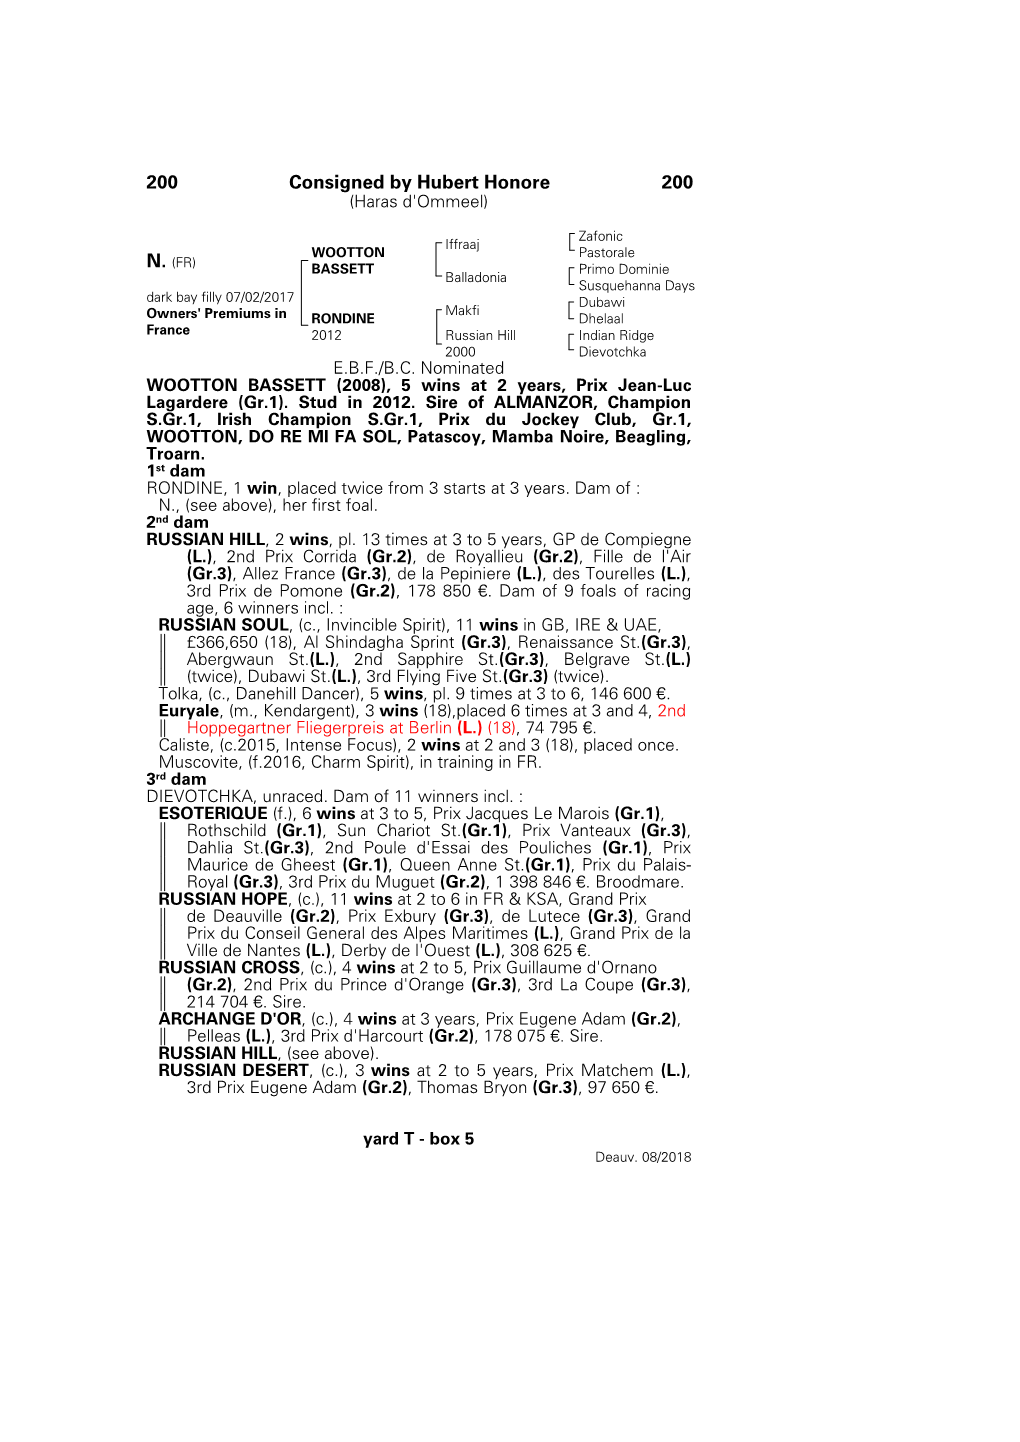 200 Consigned by Hubert Honore 200 (Haras D'ommeel)